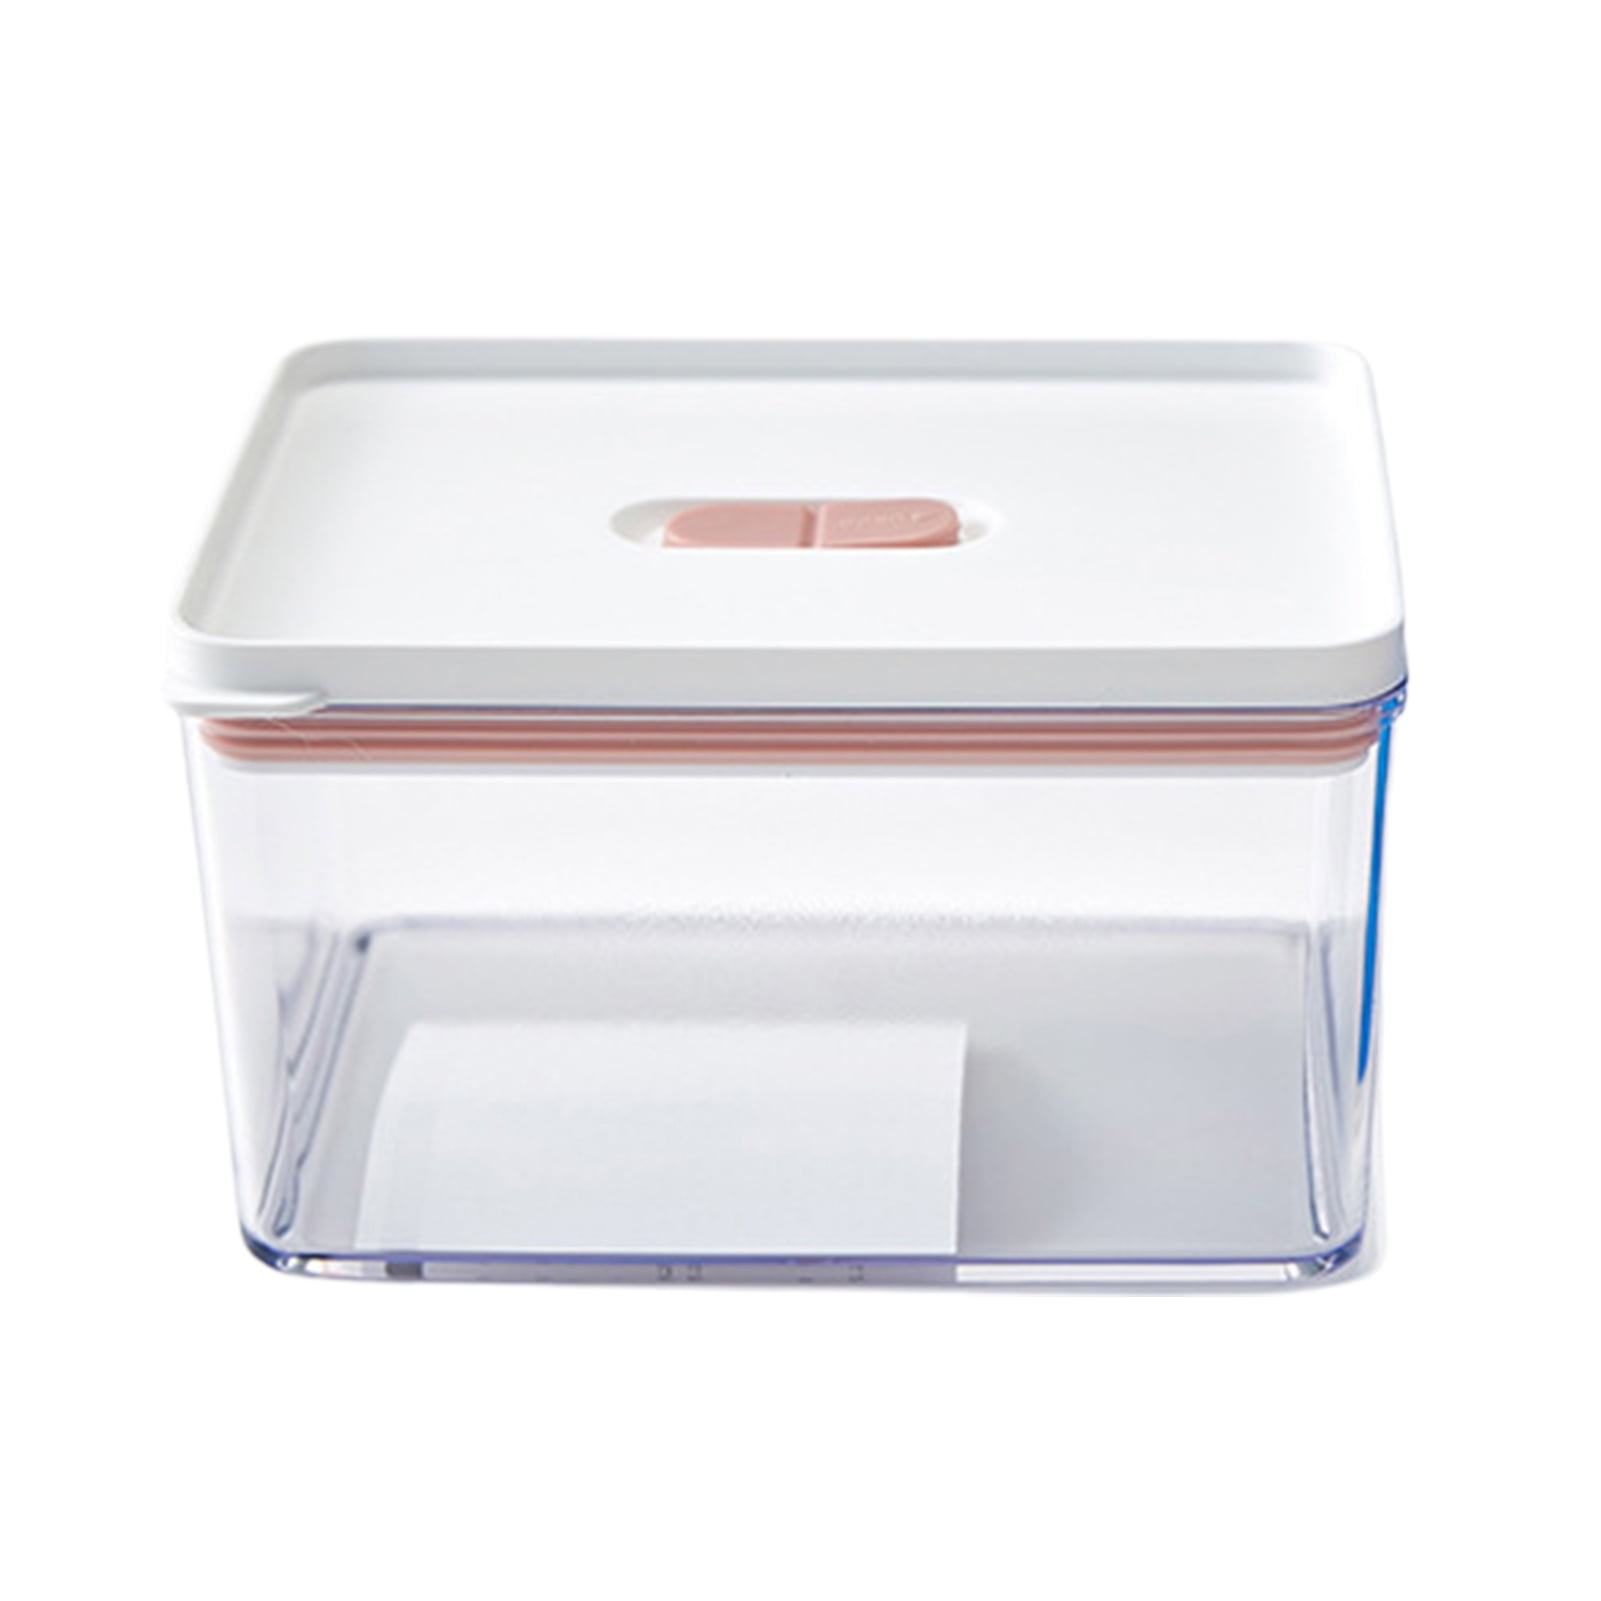 Storage Box with Lid Large Capacity Plastic Food Grade Container, Visible  Design, Refrigerator Accessories for Food Storage